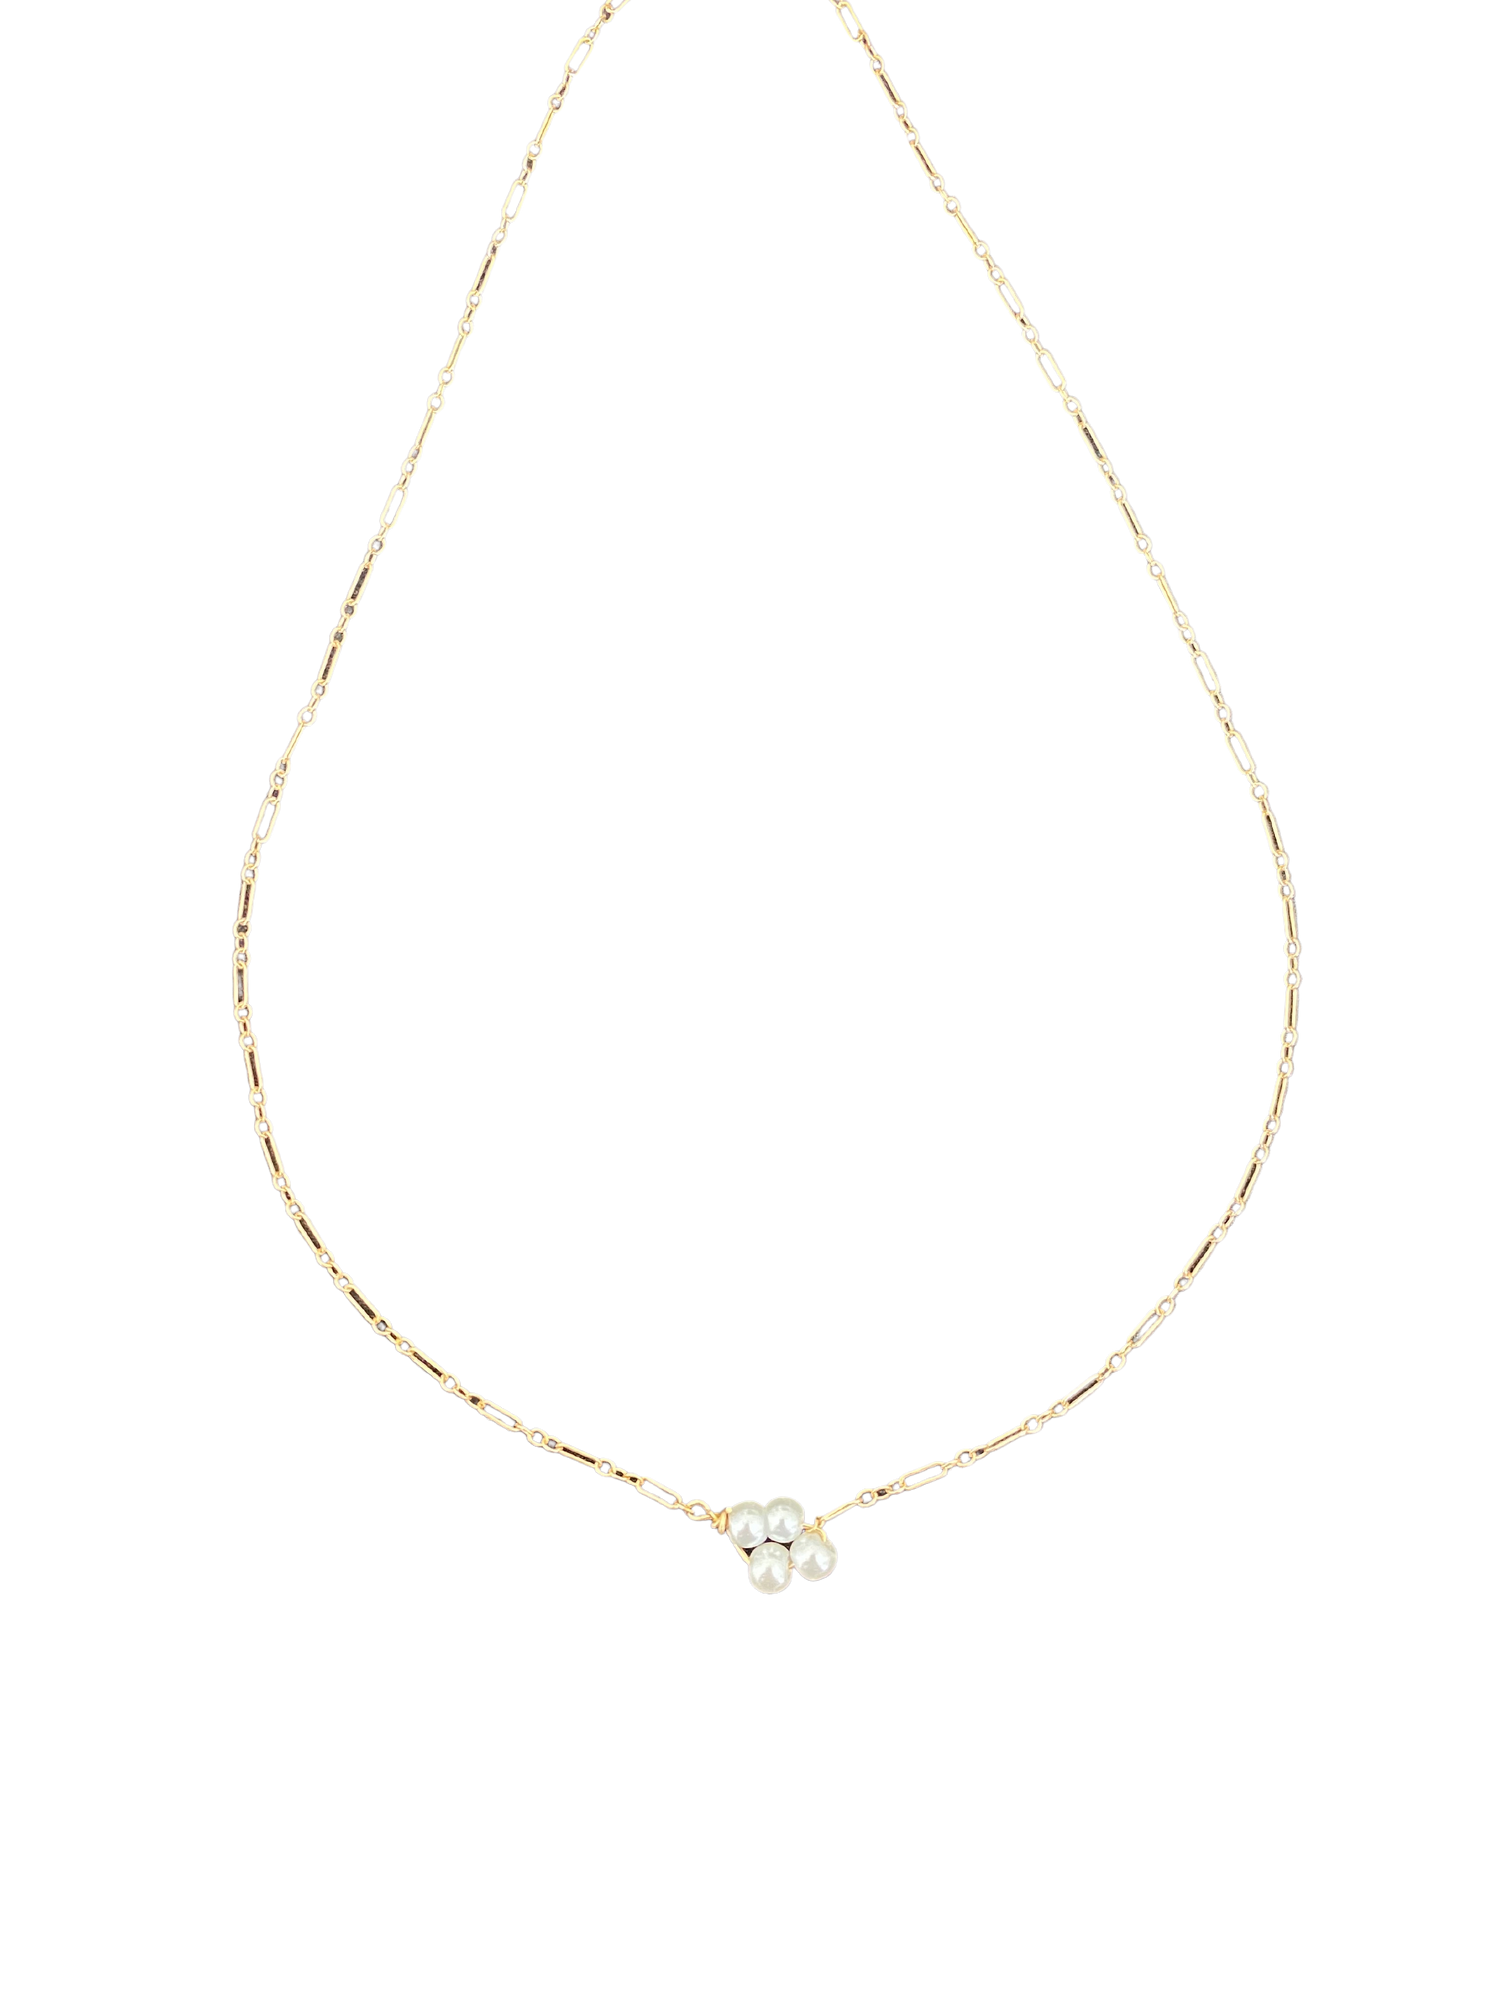 Dainty, Gold, Rosette, Pearl, Necklace